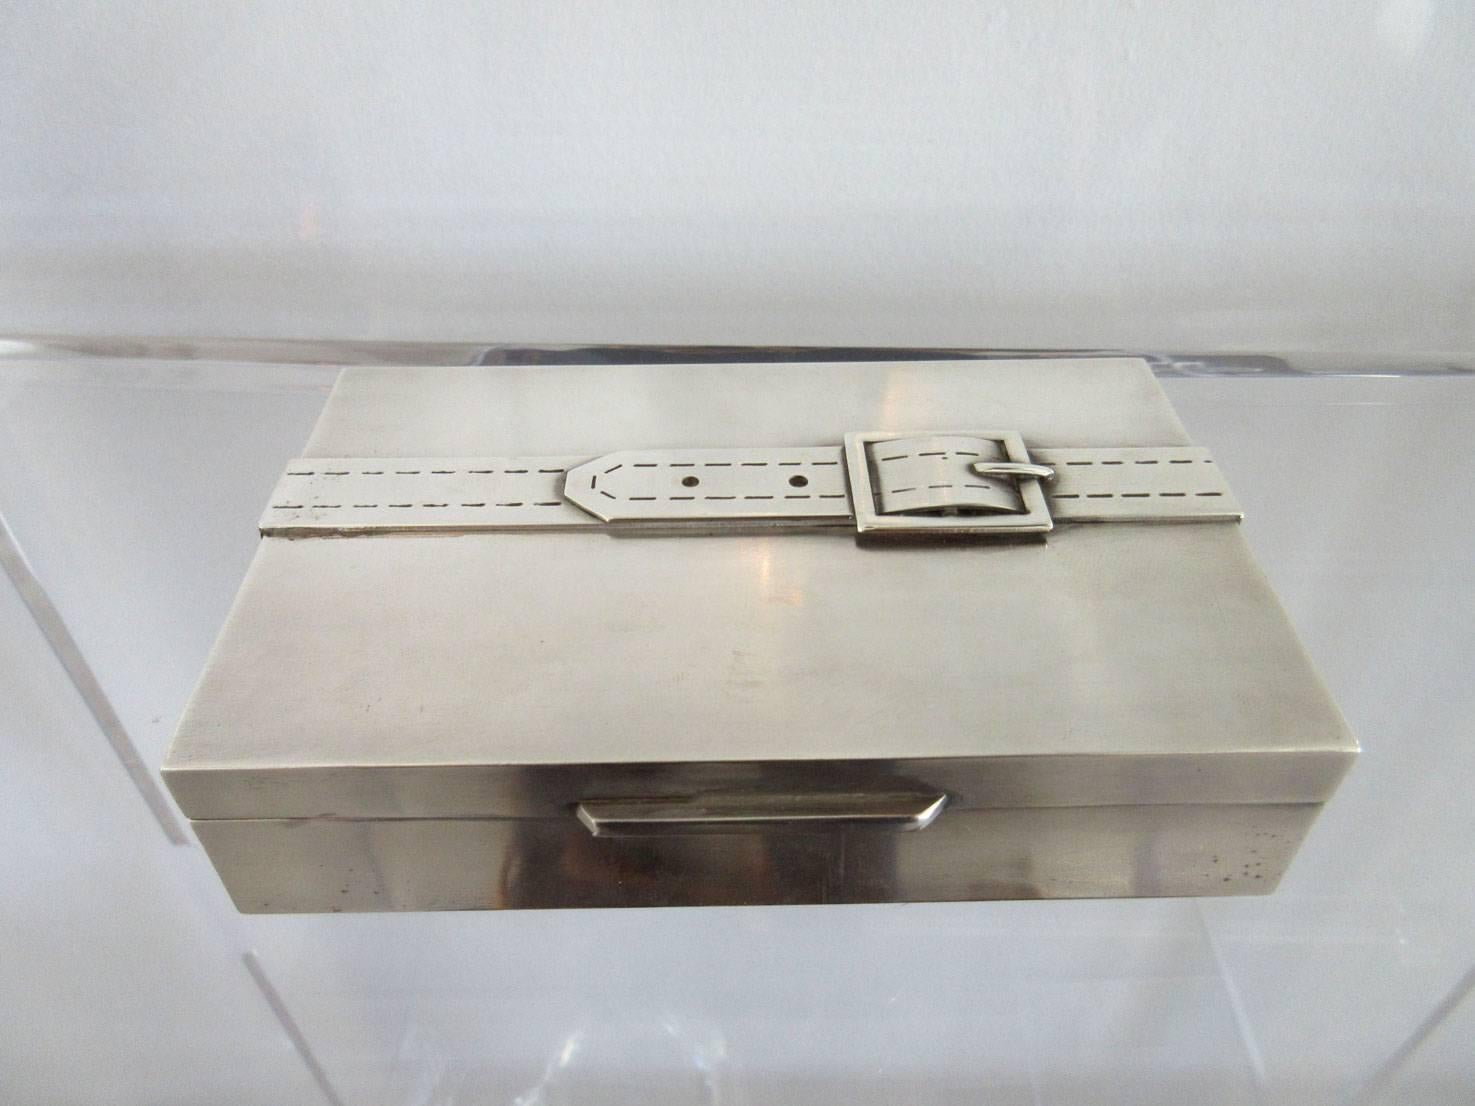 Vintage Maria Pergay silver plated box with iconic buckle motif. Signed on the interior.